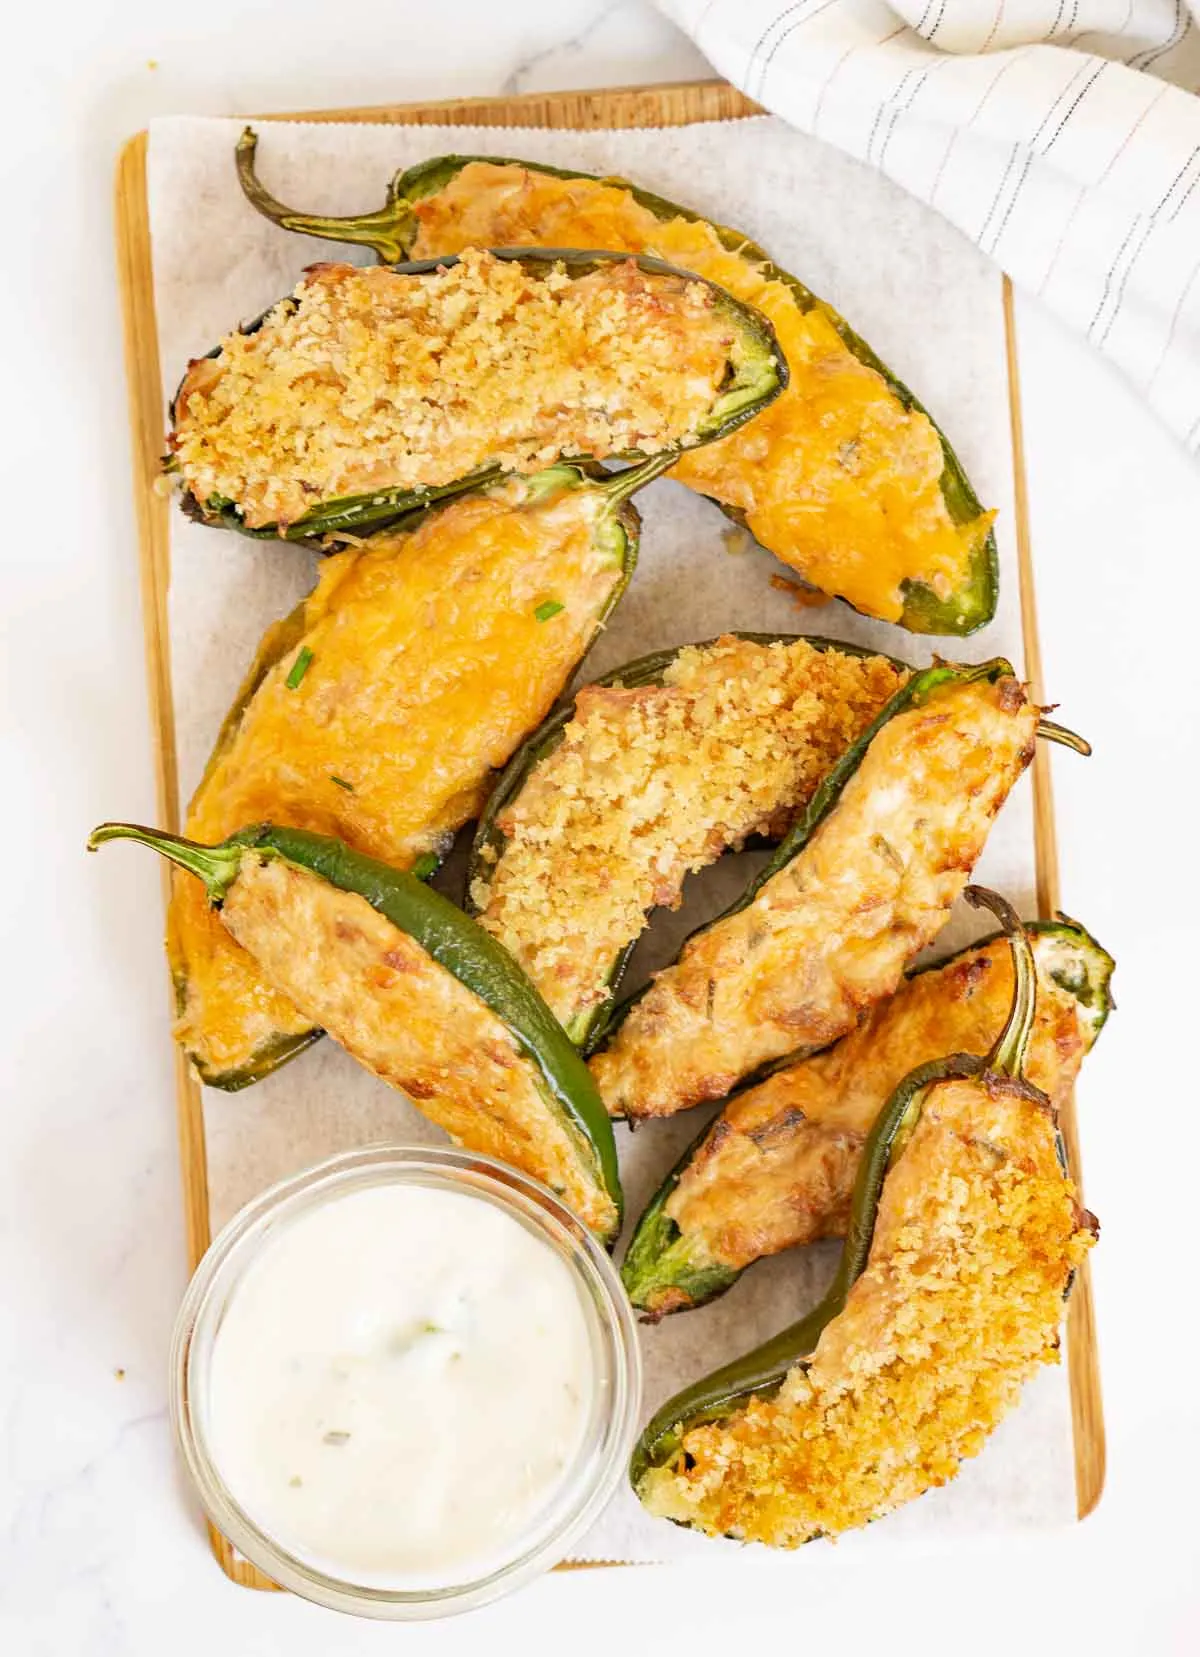 Tuna jalapeño poppers with different toppings on a serving board